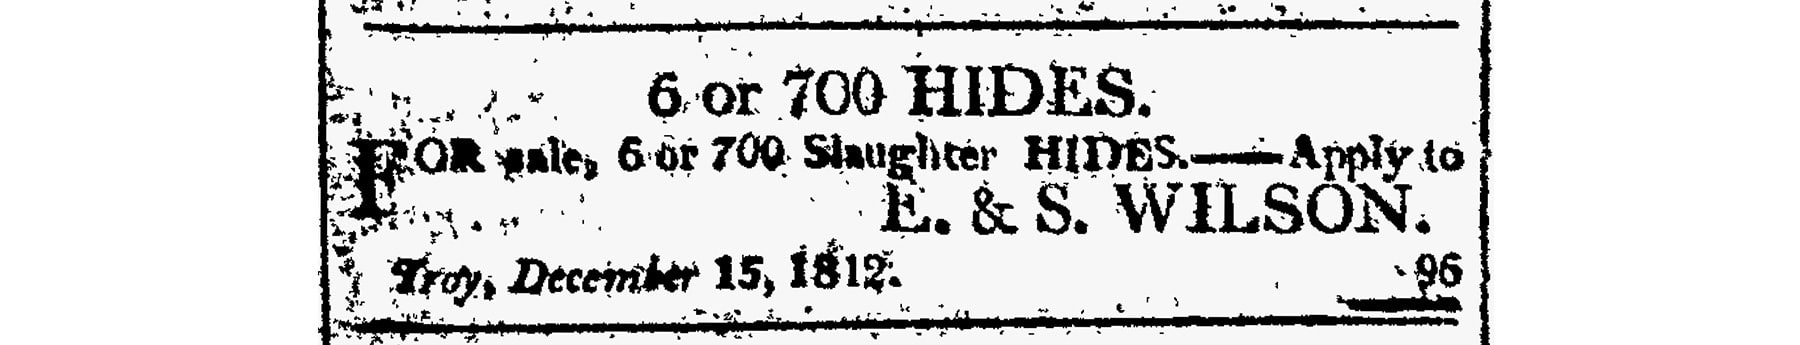 a an for animal hides by E & S Wilson in 1812